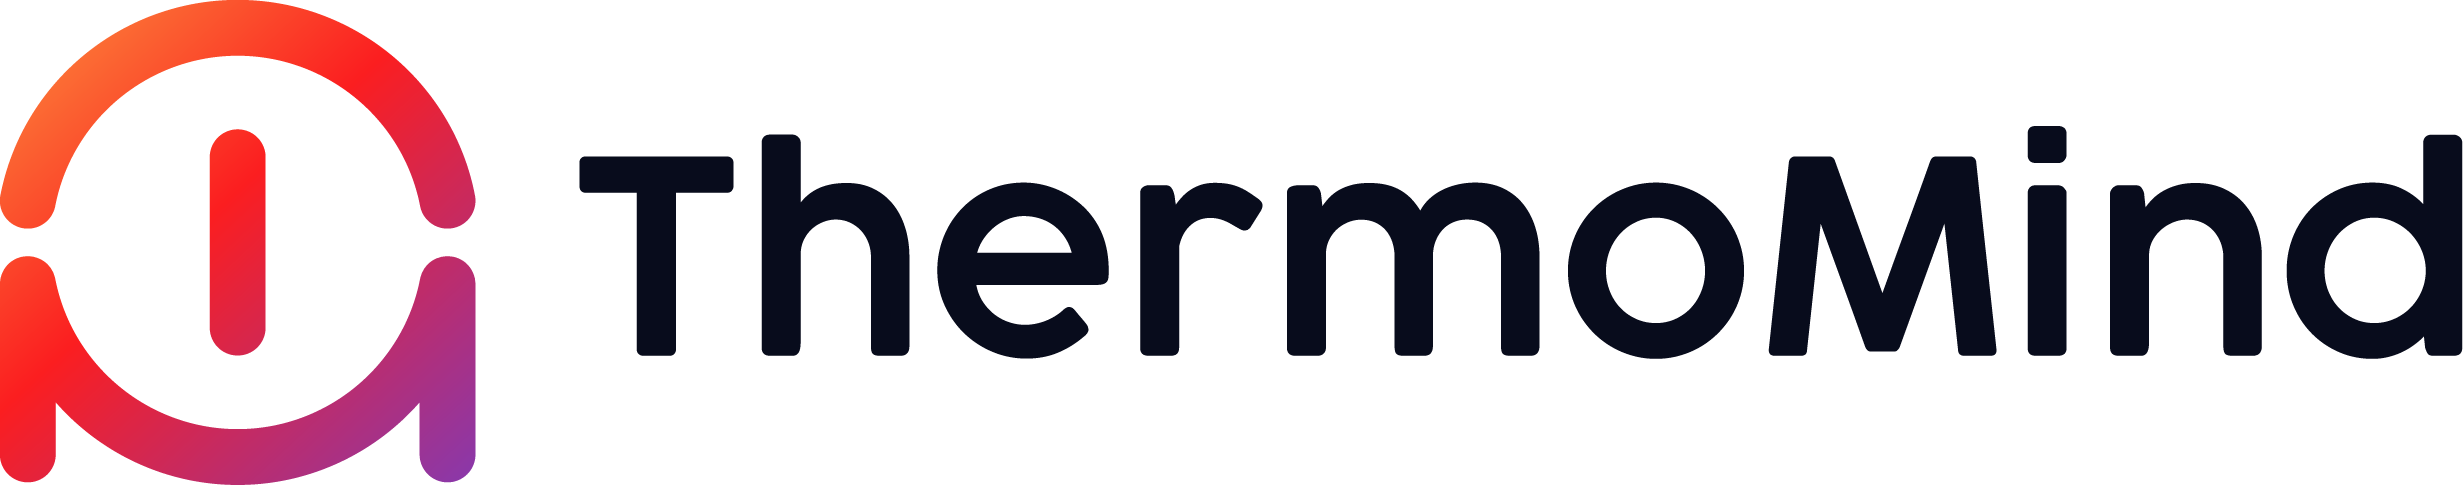 Thermomind logo